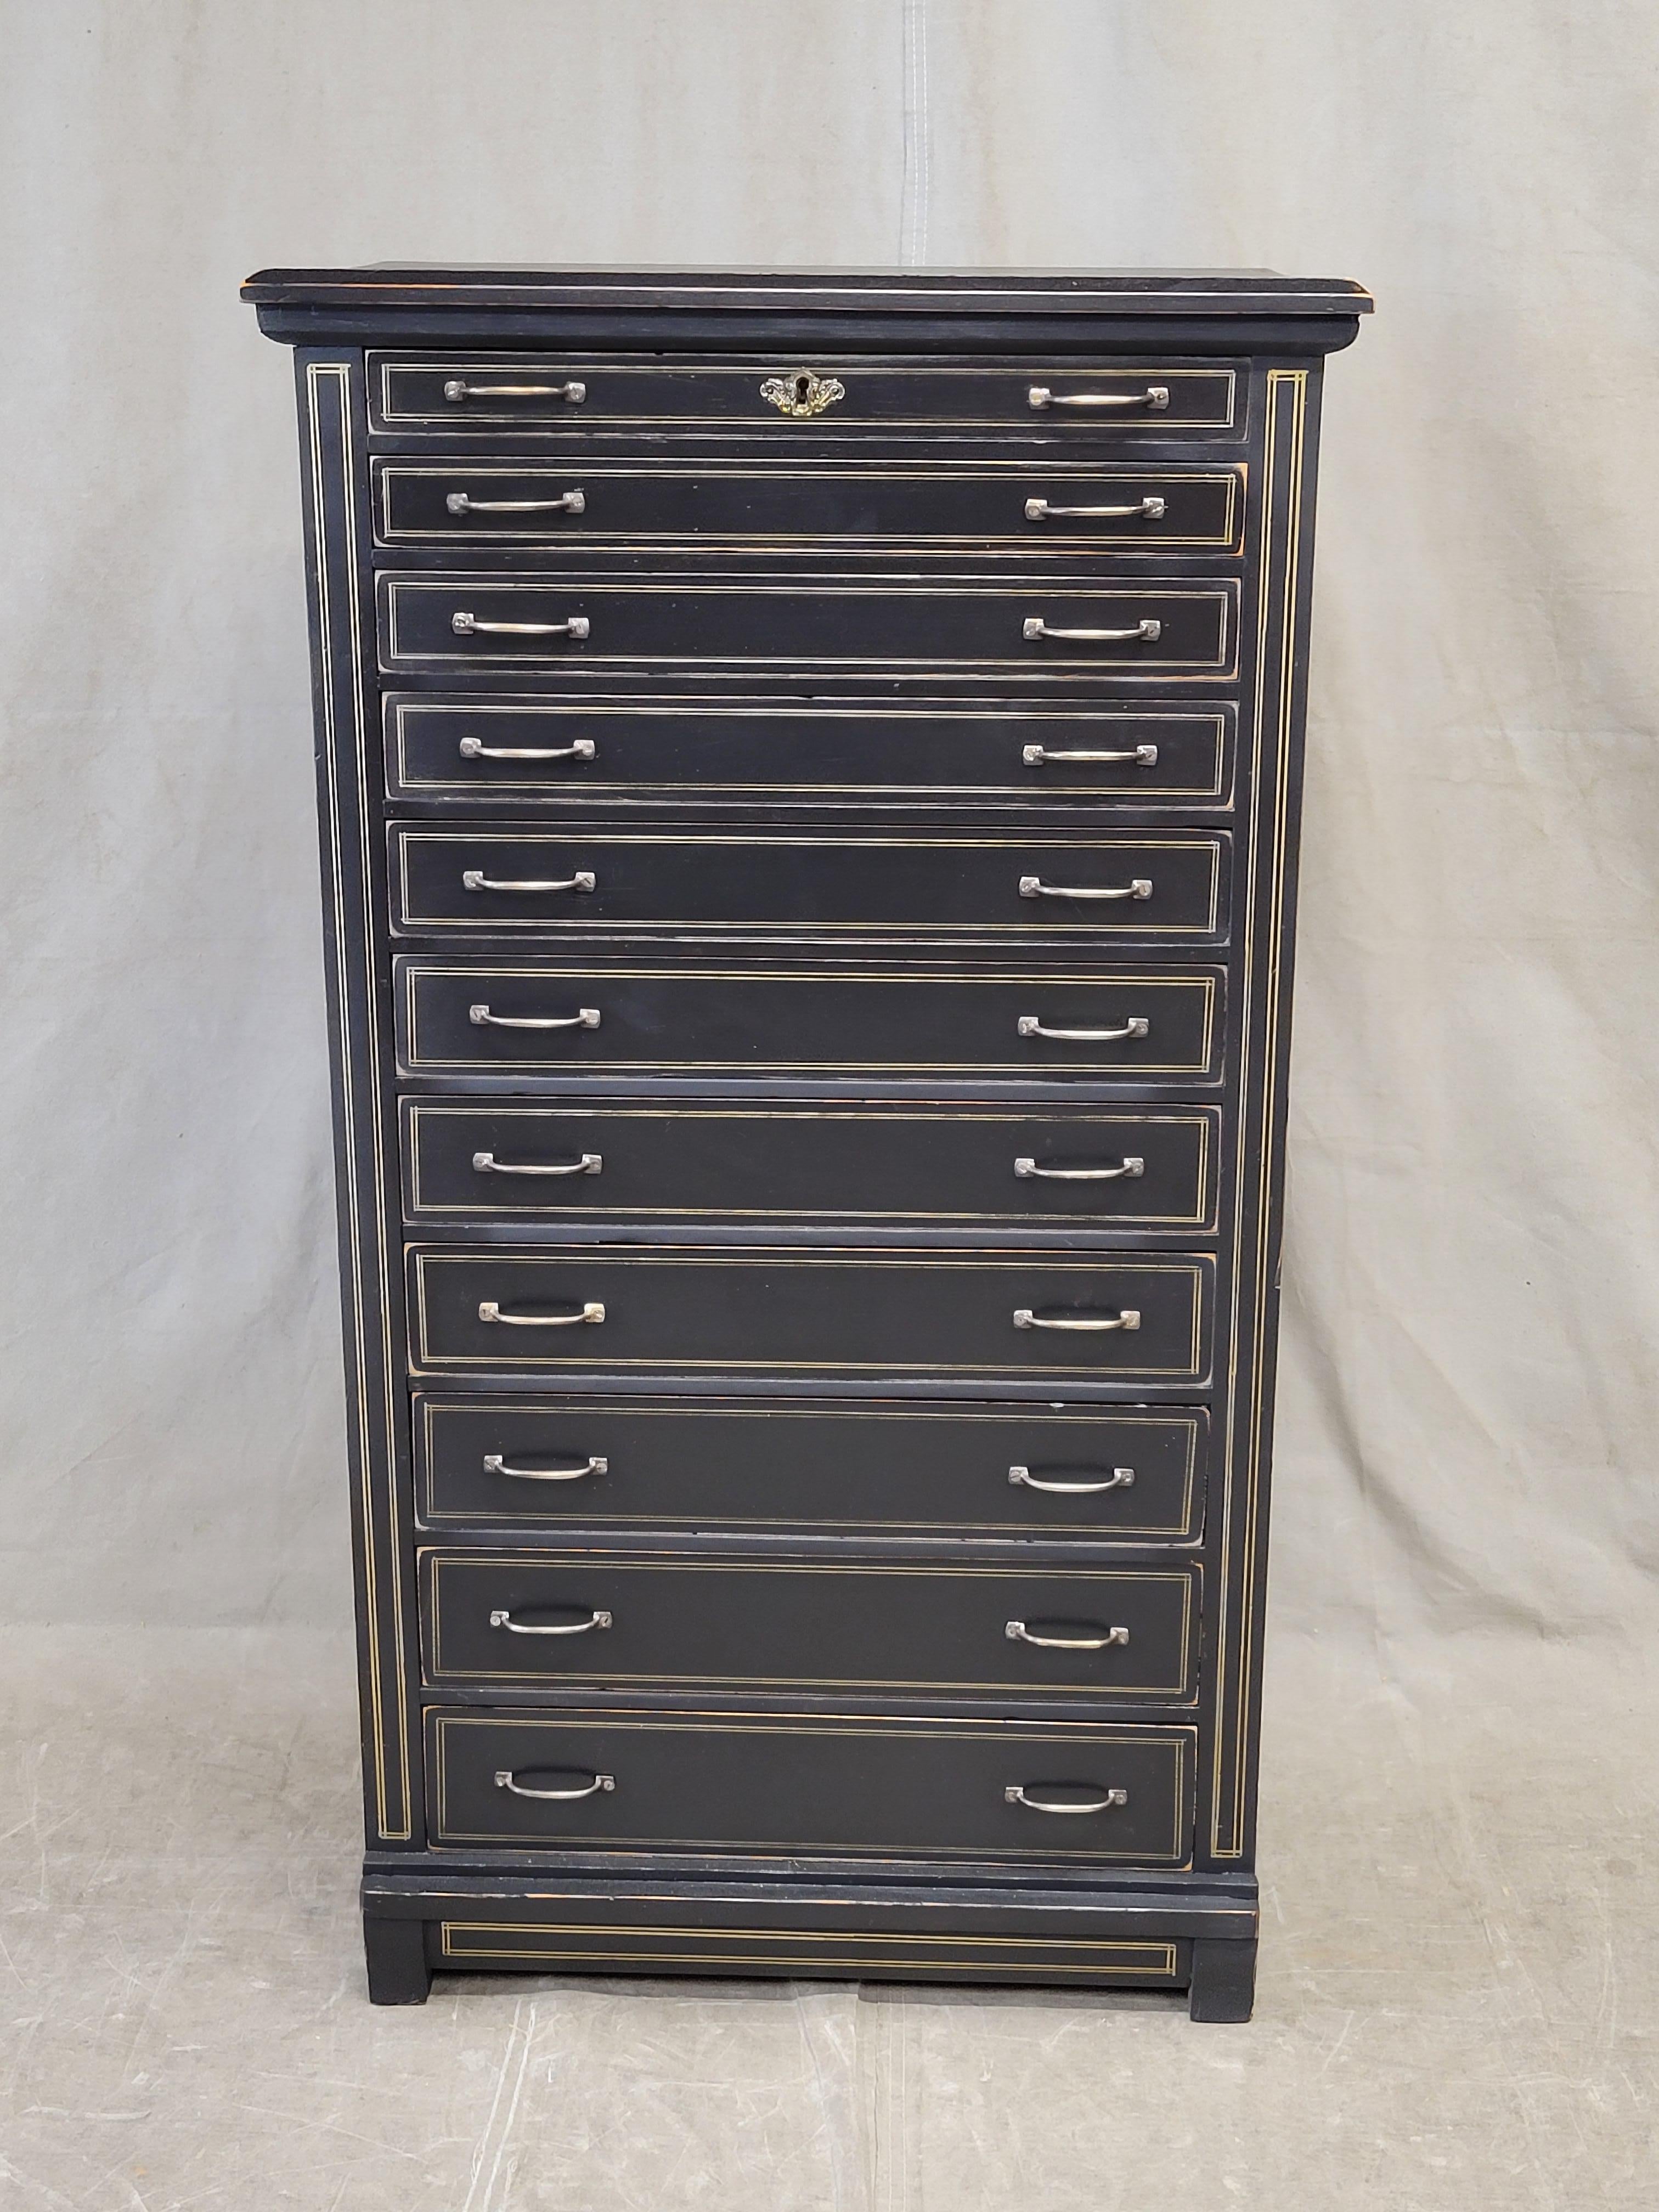 A classic English styled antique pine black painted eleven drawer lingerie tall chest with gold French line motif and brass hardware. Built by a skilled craftsman with eleven graduated drawers and hand-cut dovetails. This piece has been